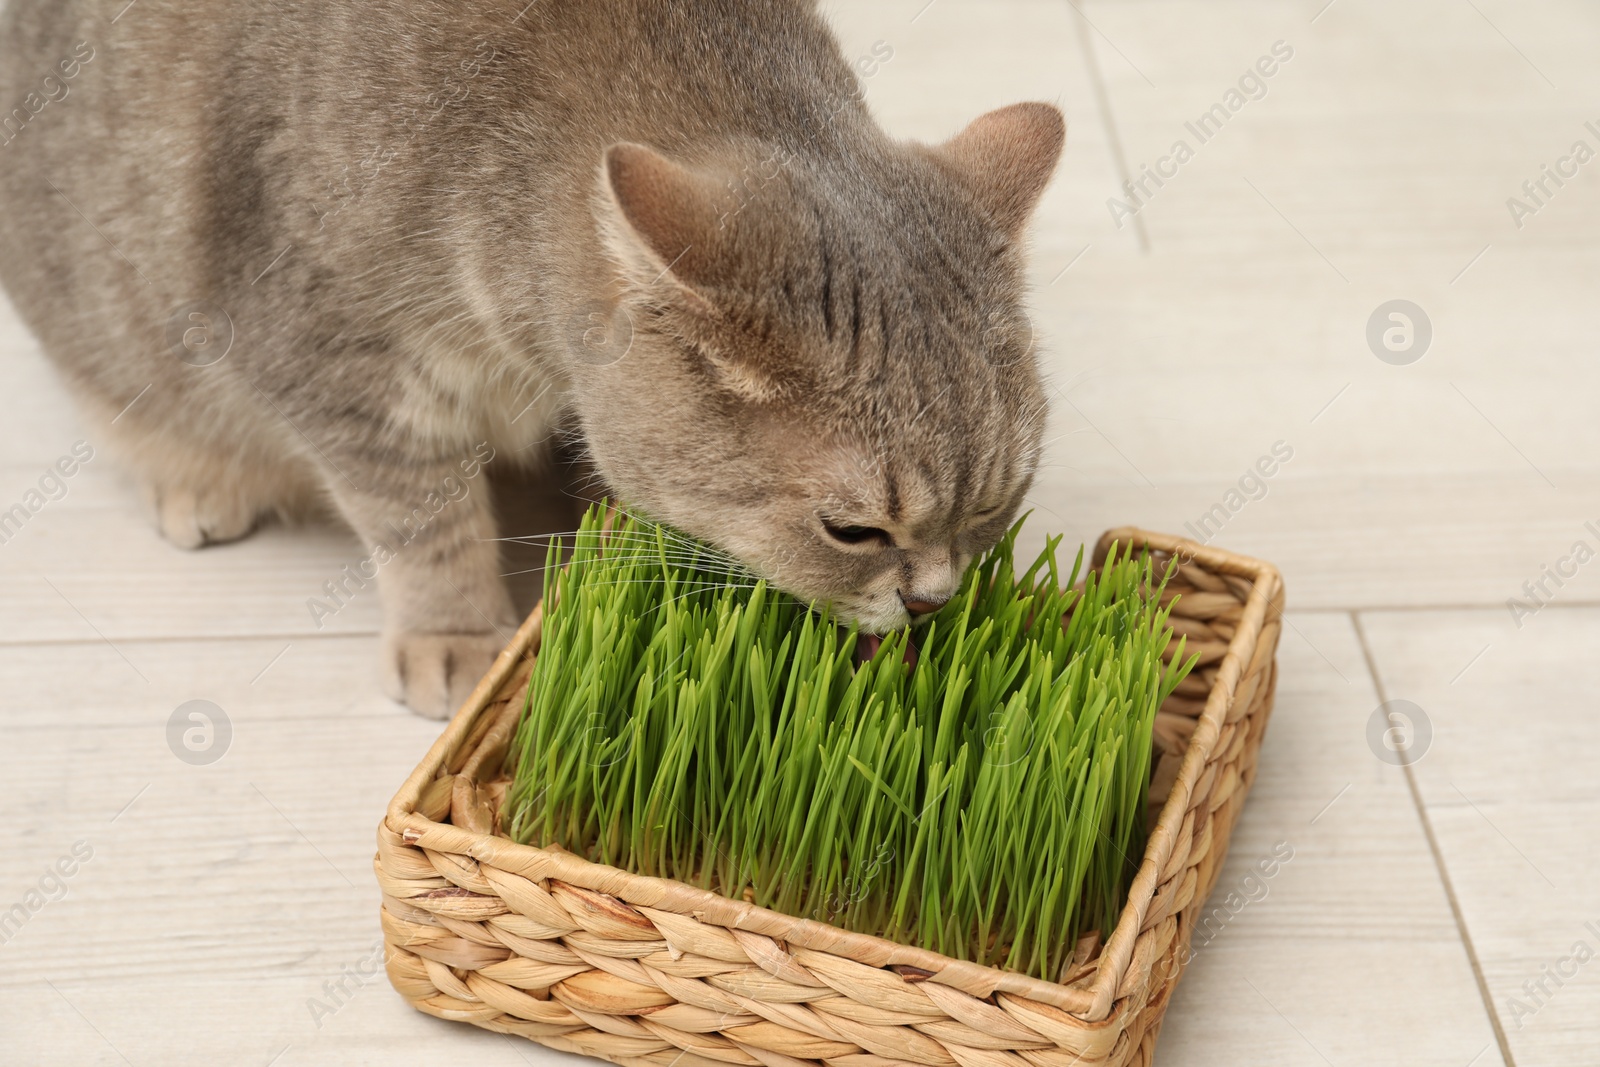 Photo of Cute cat eating fresh green grass on floor indoors